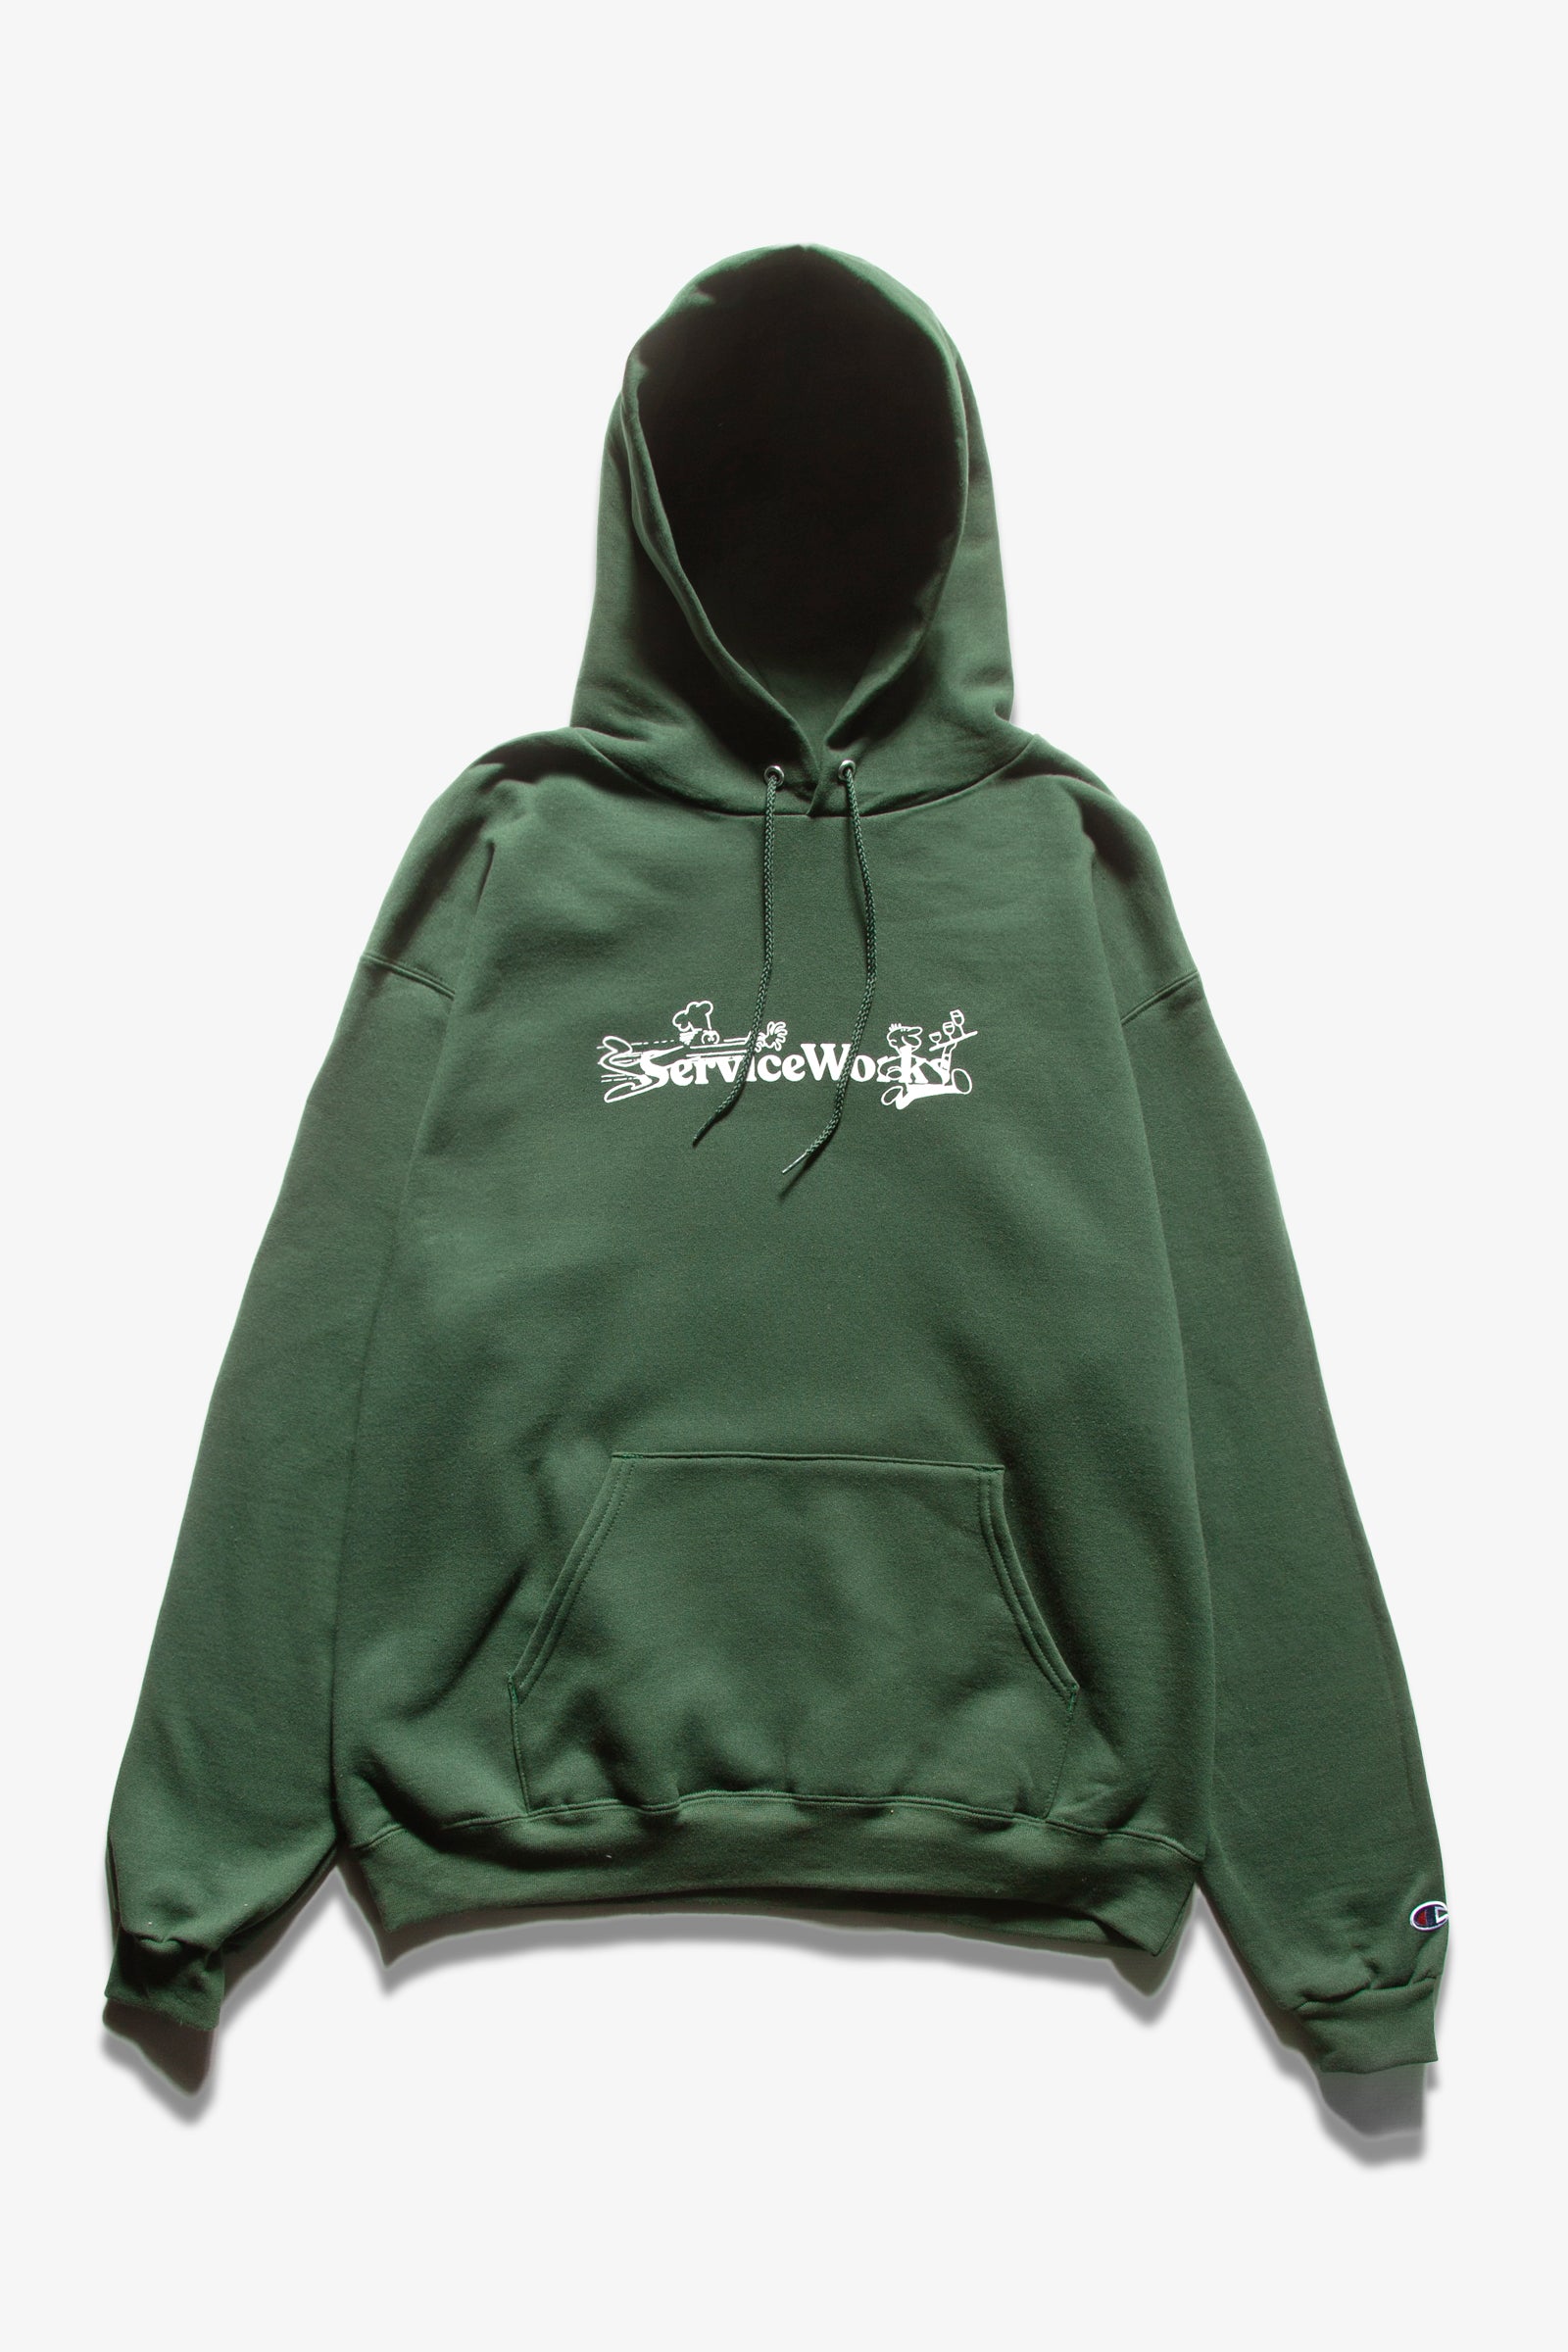 Service Works - Chase Hoodie - Forest Green